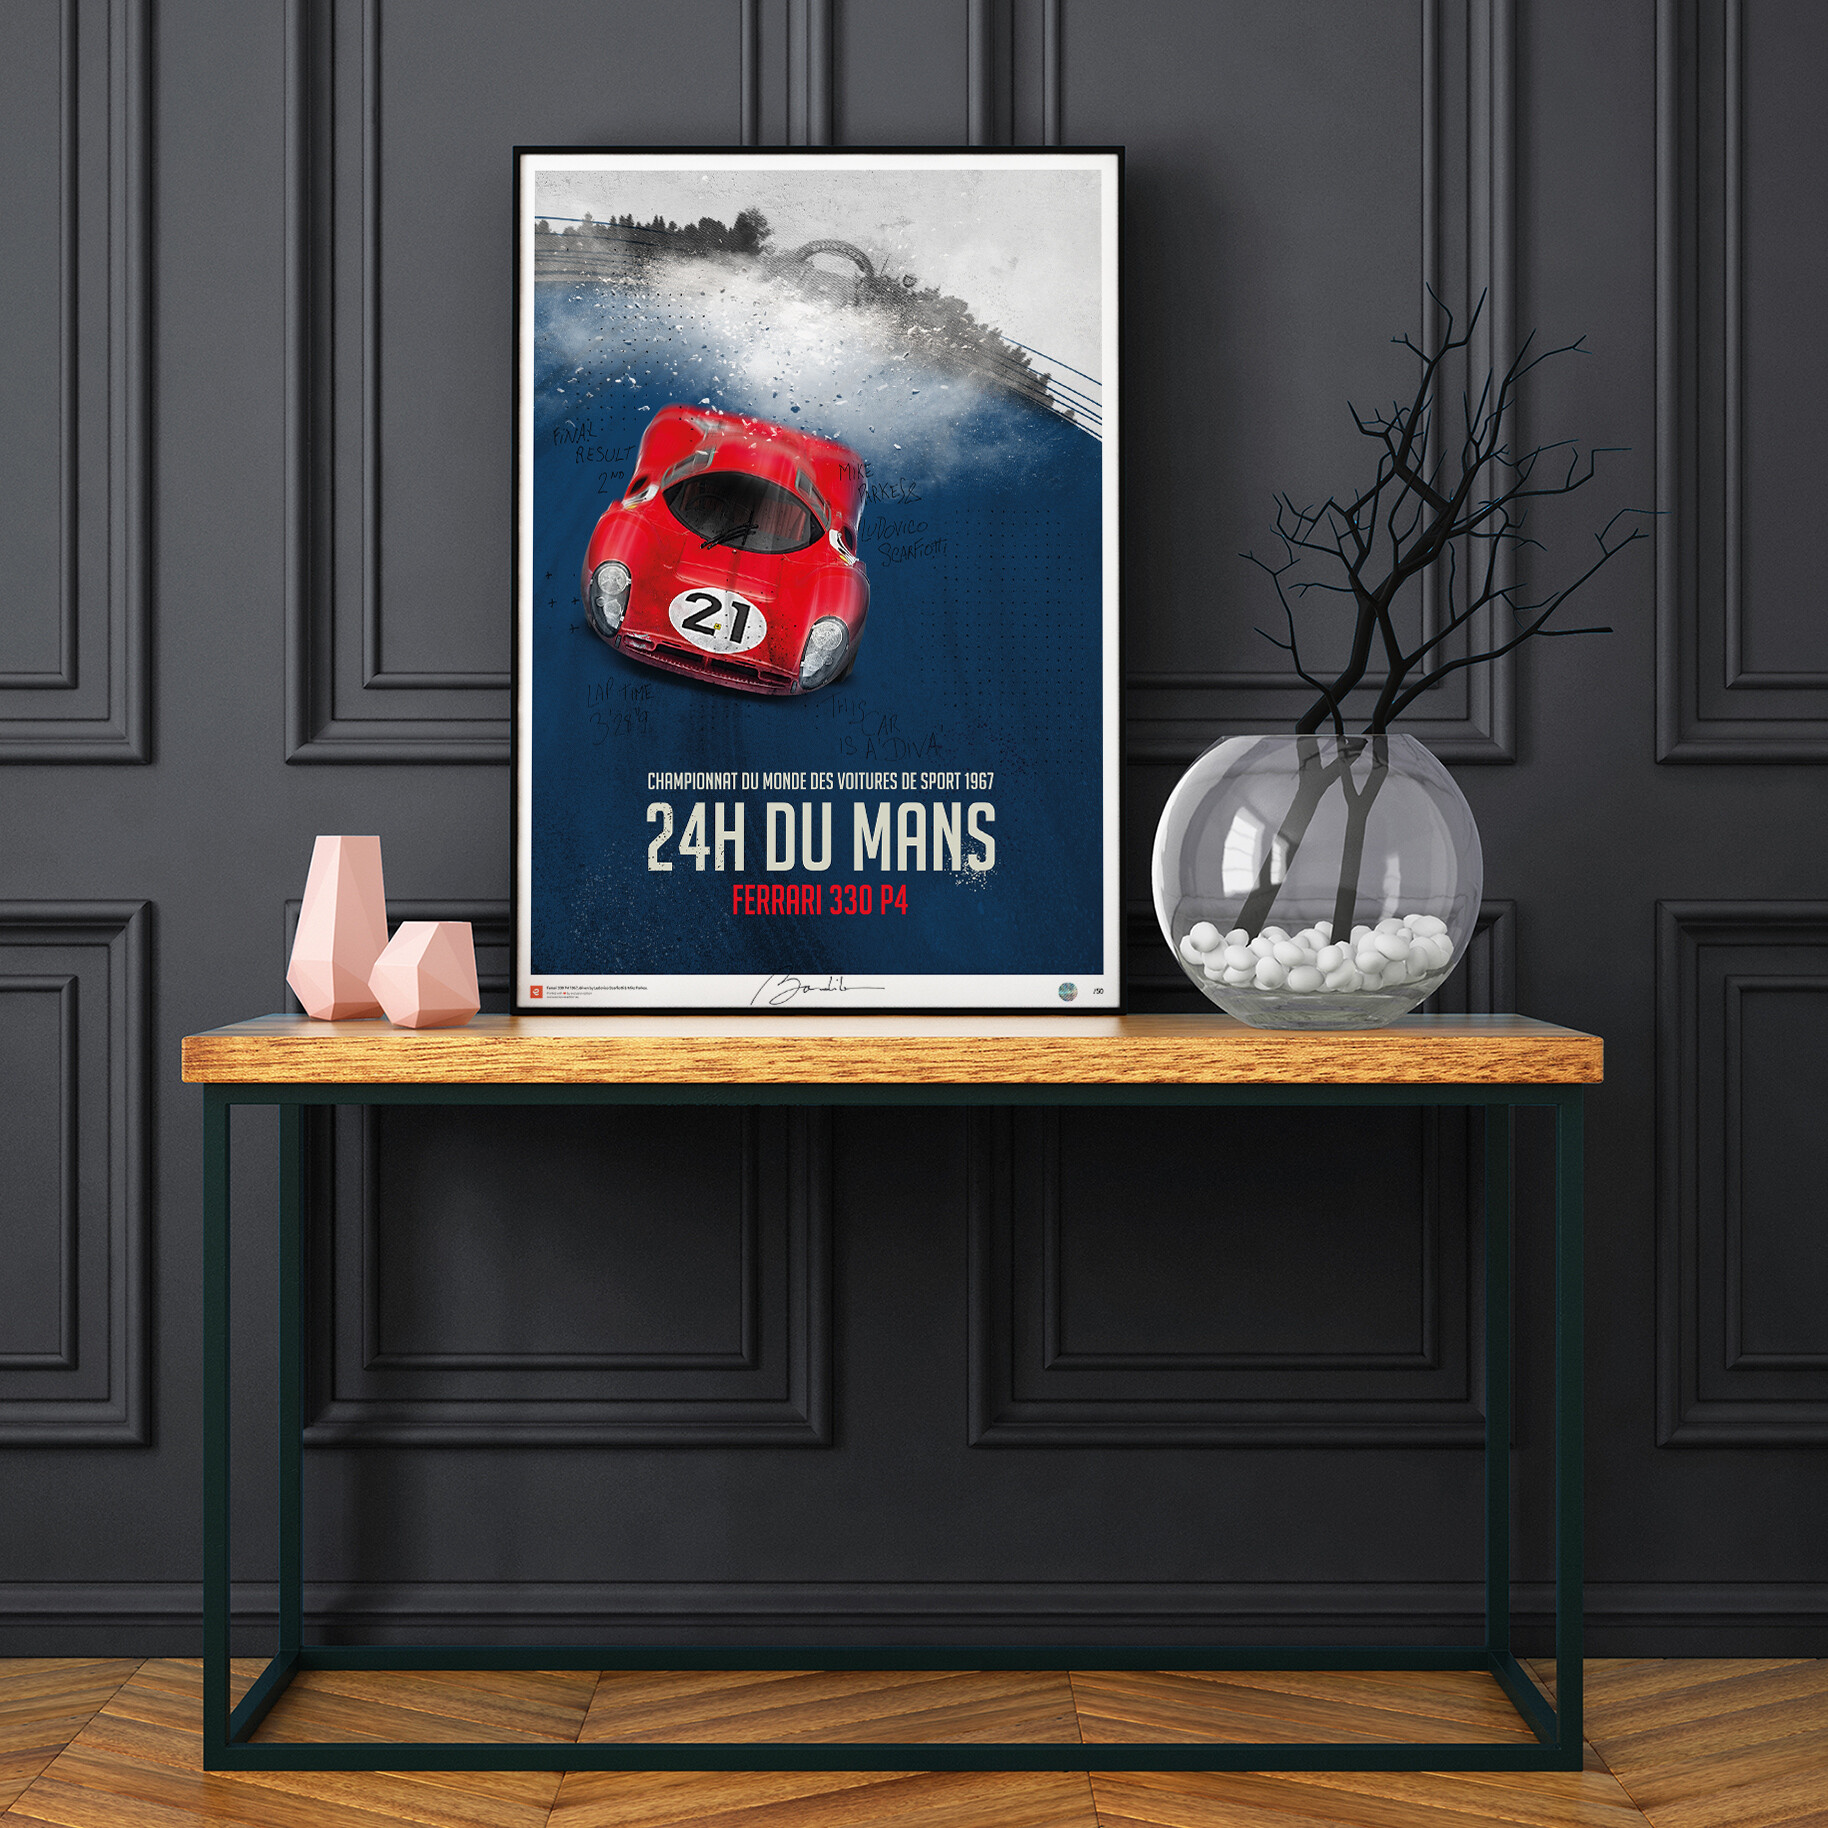 Poster010 Mockup MurNoir - Collector's edition posters of most beautiful historic race cars in the world - 1967 was a banner year for the Enzo Ferrari motor company, as it saw the production of the mid-engined 330 P4, a V12-engined endurance car intended to replace the previous year's 330 P3. Only four Ferrari P4-engined cars were ever made: three new 330 P4s and one ex P3 chassis (0846). Their three-valve cylinder head was modeled after those of Italian Grand Prix-winning Formula One cars. To this was added the same fuel injection system from the P3 for an output of up to 450 hp (335 kW). The P3 won the 1000 km Monza in 1966, and the P4 won the same race in 1967. Two P4s, and one 412 P crossed the finish line together (in first 0846, second 0856, and third place 0844) in the 1967 24 Hours of Daytona, for a photo finish to counter Ford's photo of the Ford GT40 Mk.II crossing the finish line together First, Second, and Third at the 1966 24 Hours of Le Mans. Since then, the fate of these four cars has been the subject of much attention. History : See wikipedia article All orders of minimum 100 € are FREE DELIVERED ALL AROUND THE WORLD